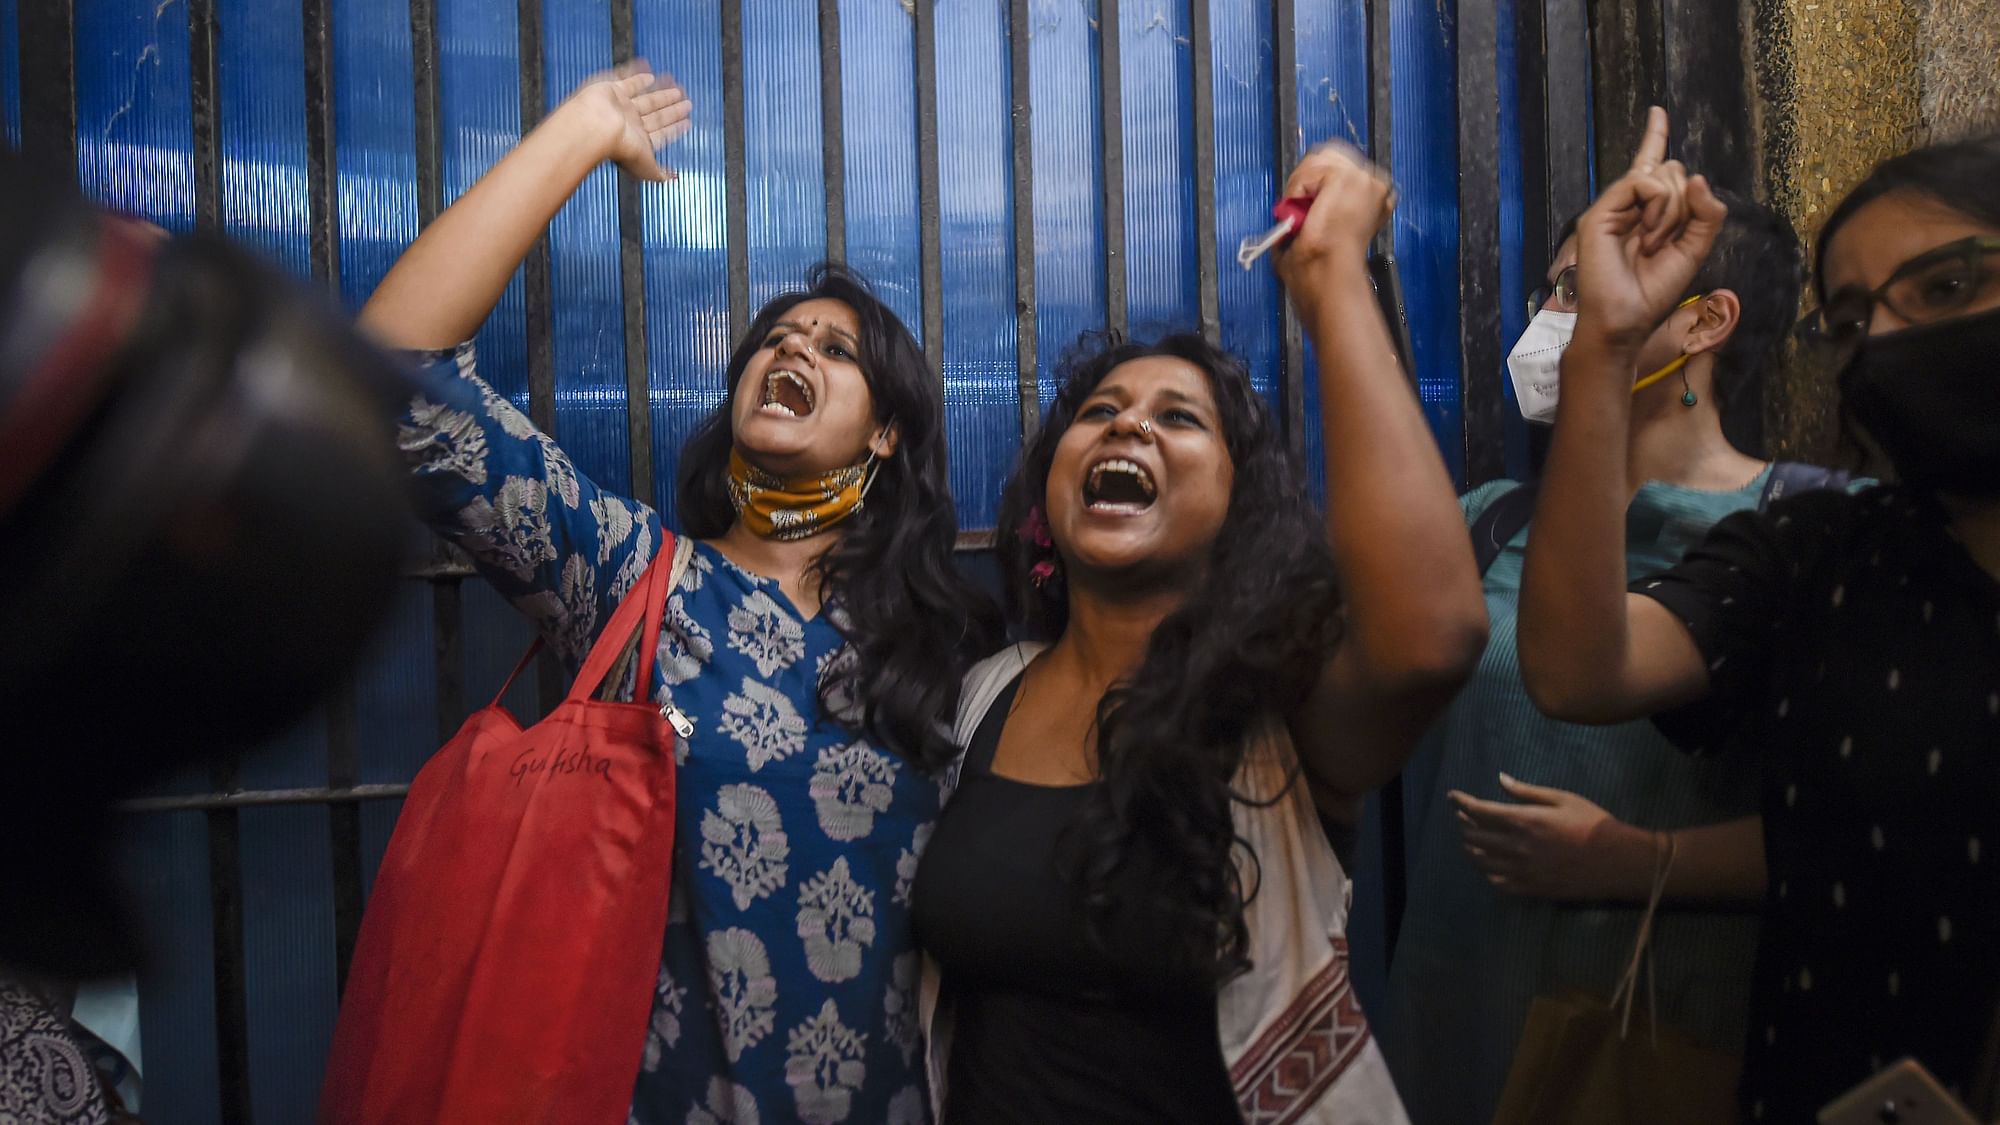 <div class="paragraphs"><p>Student activists Devangana Kalita, Natasha Narwal and Asif Iqbal Tanha were released from the Tihar Jail after 13 months of imprisonment on 17 June 2021.</p></div>